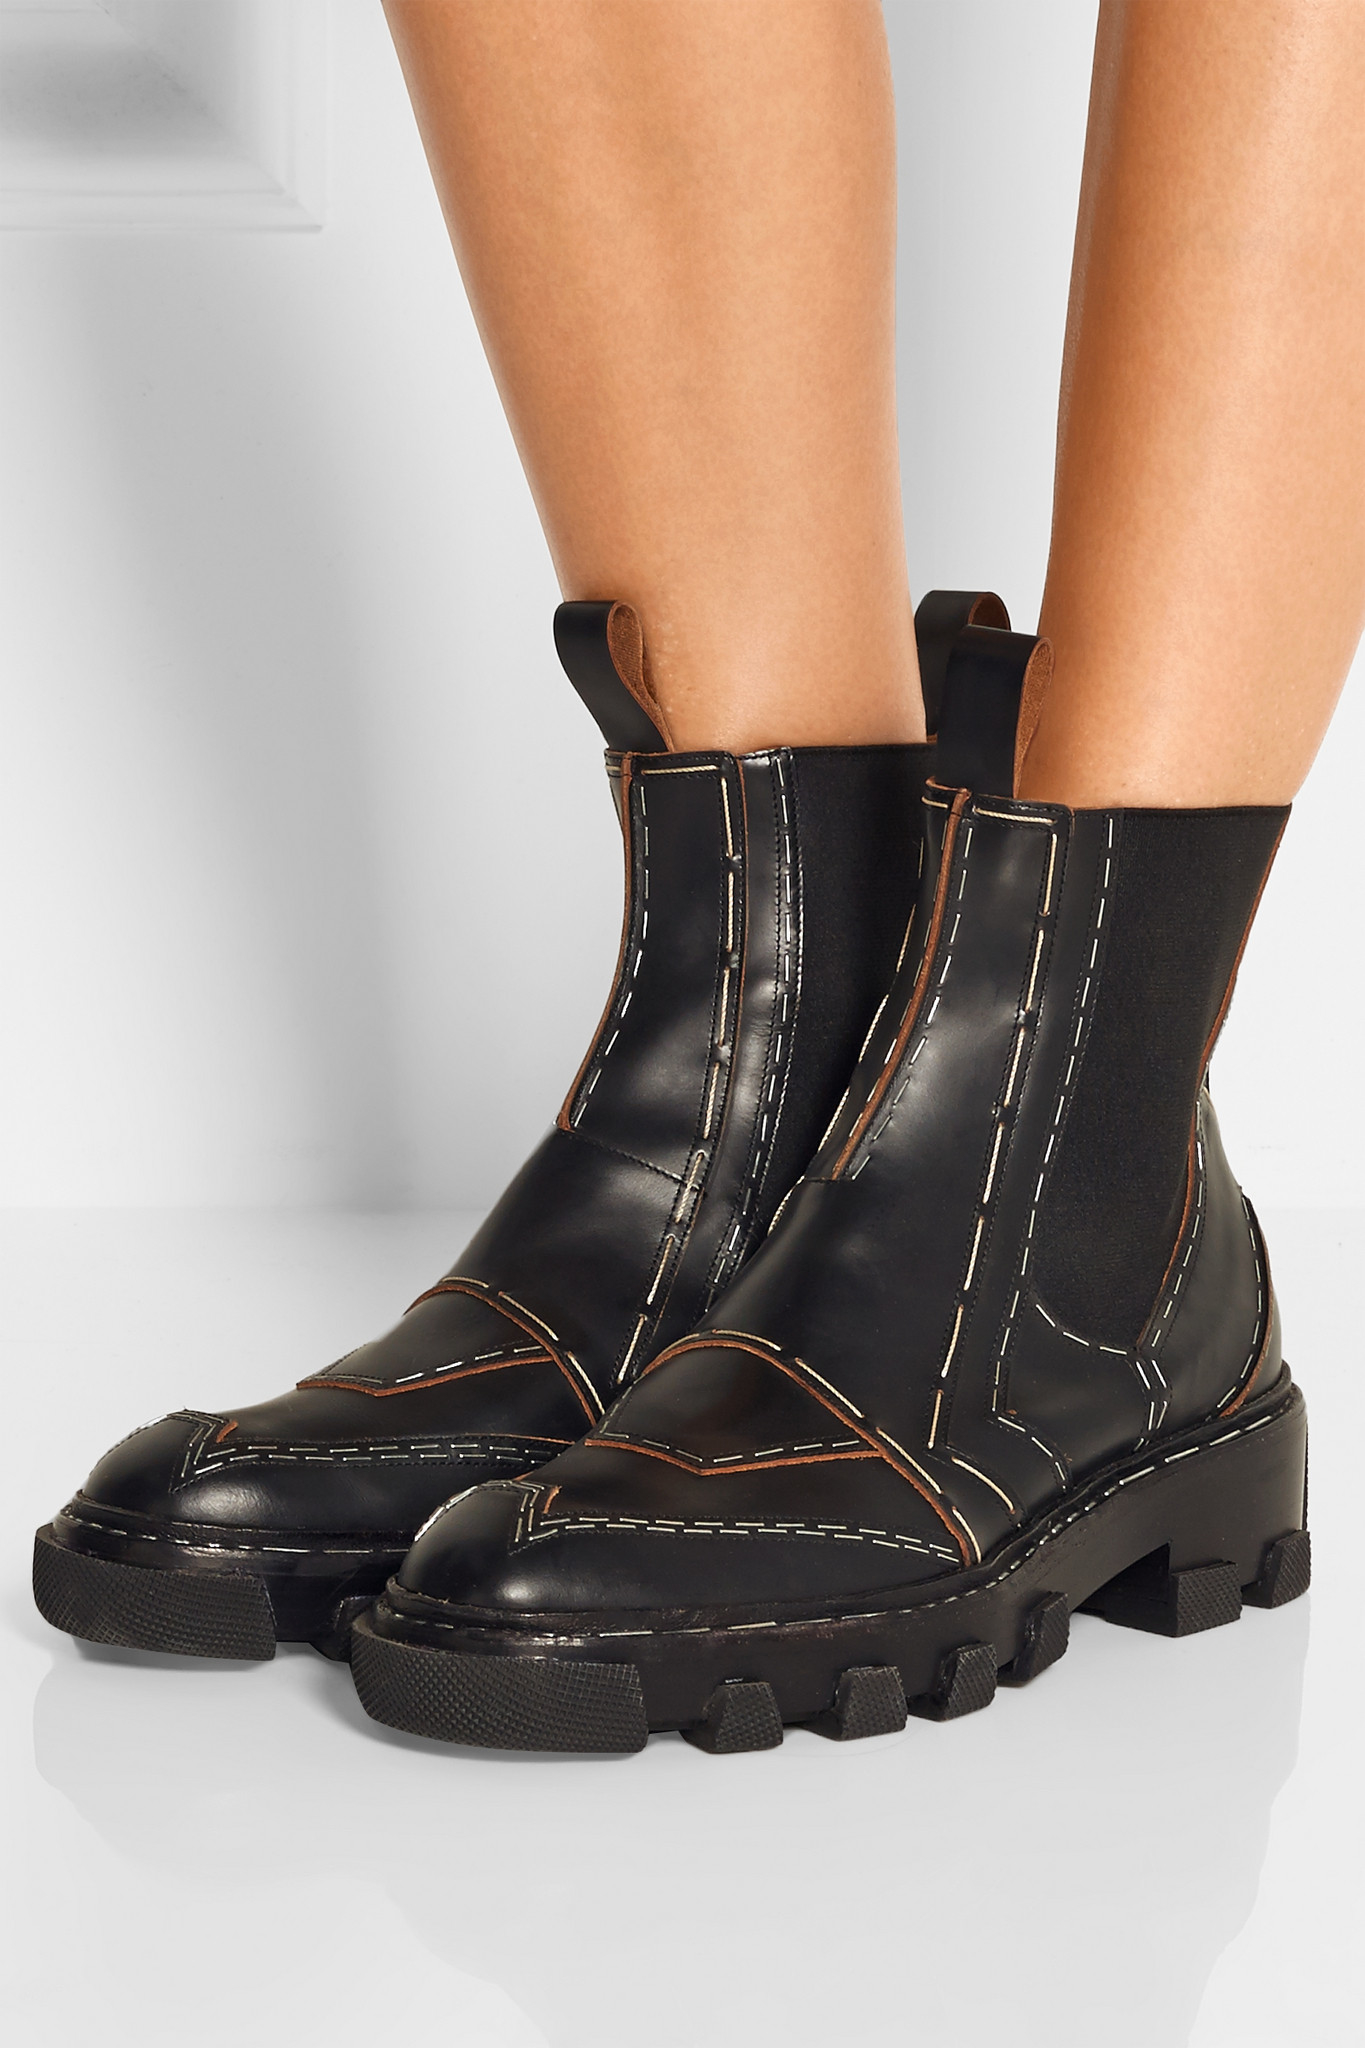 Lyst - Balenciaga Topstitch Leather Chelsea Boots in Black